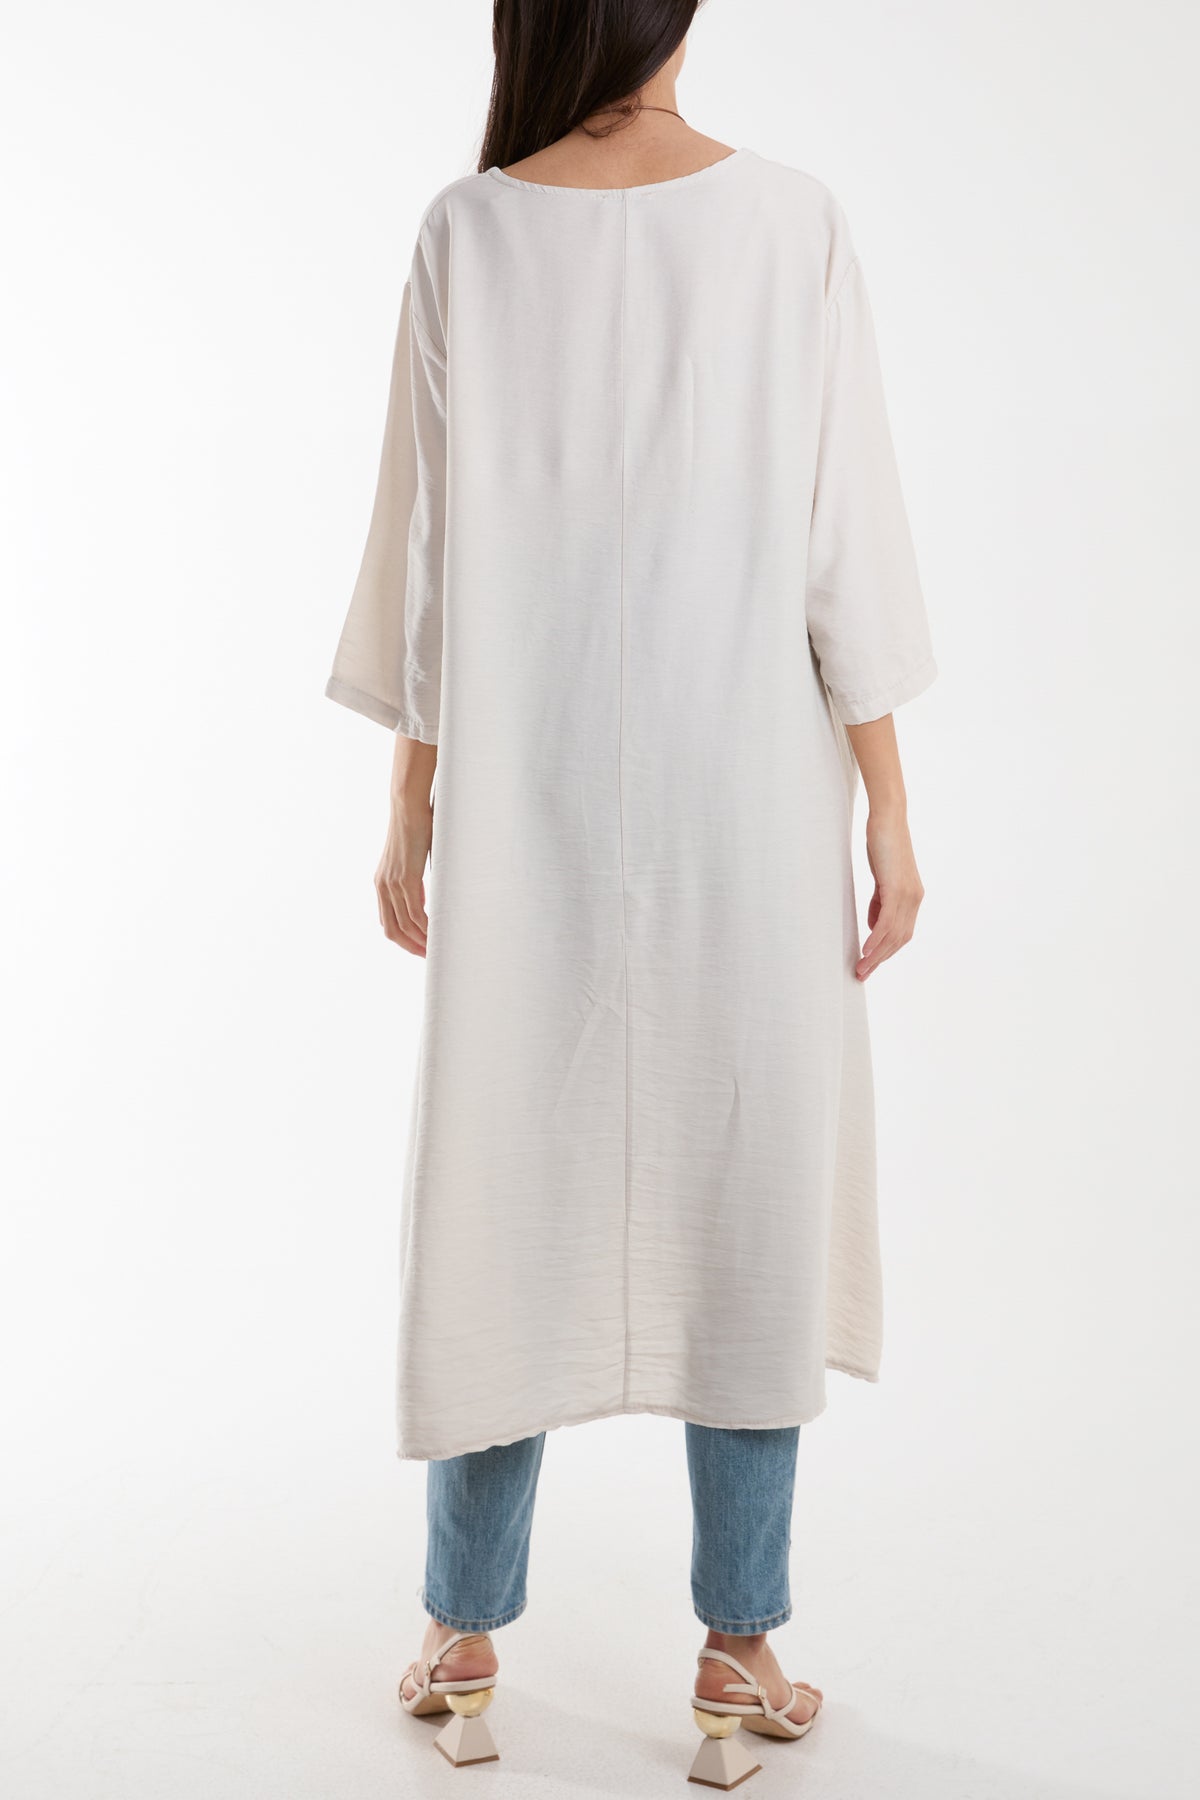 Linen Blend Necklace High Low Tunic